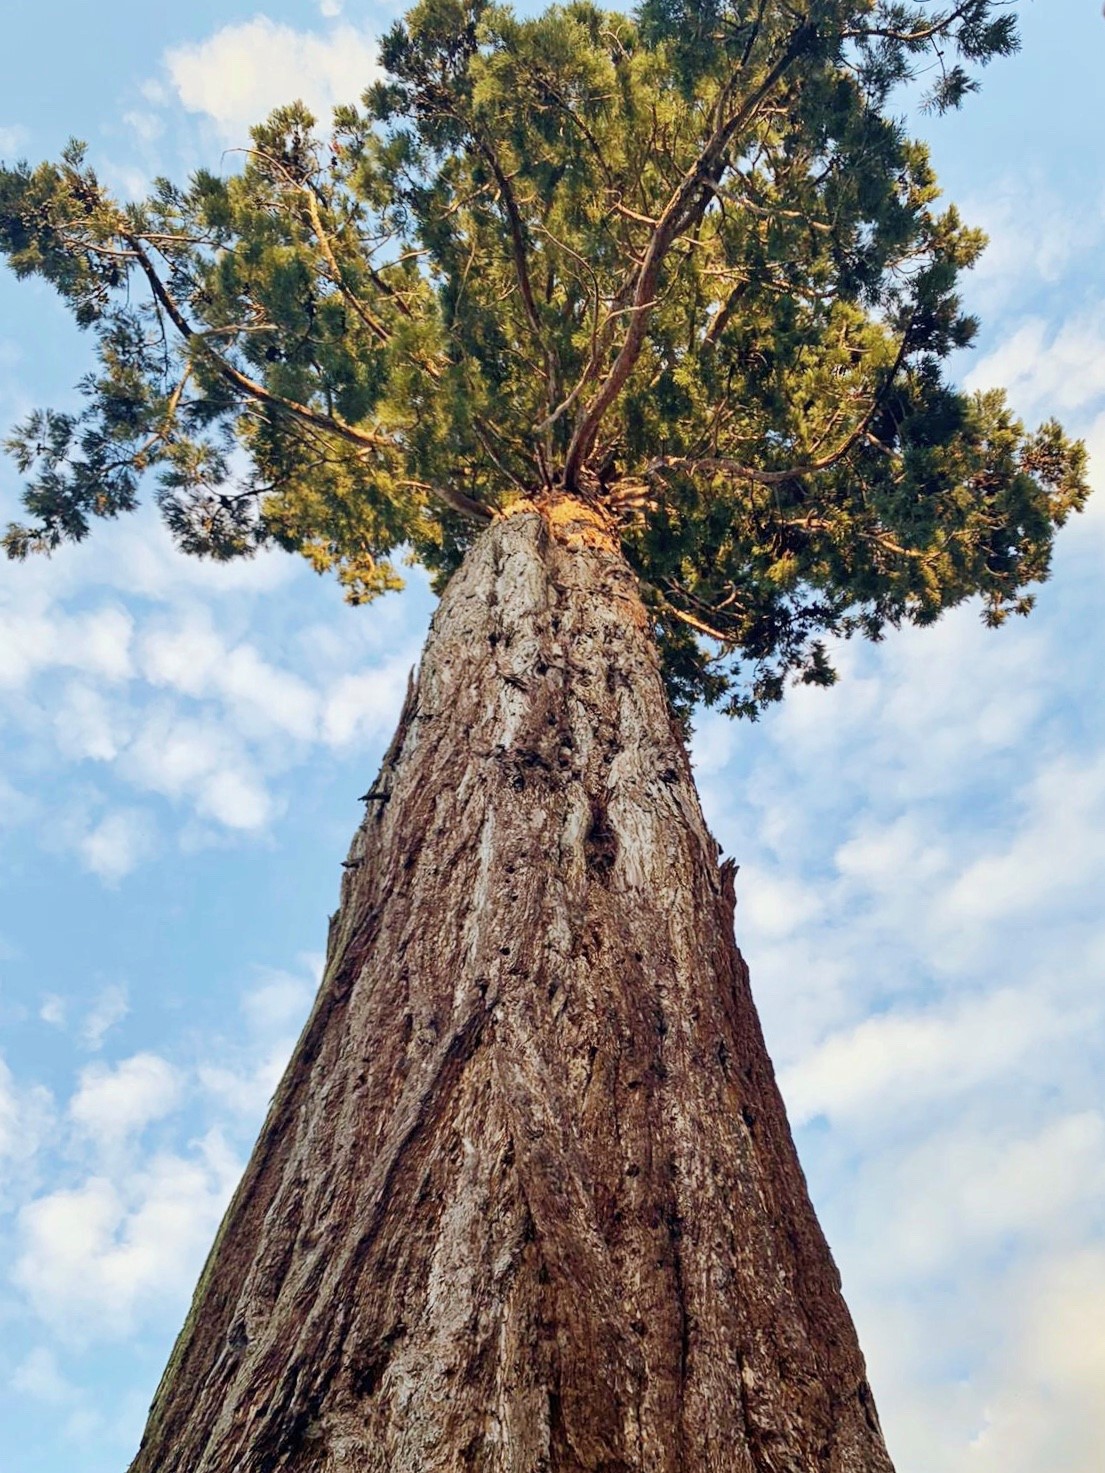 A picture looking up at the enormous Giant Sequoia on campus